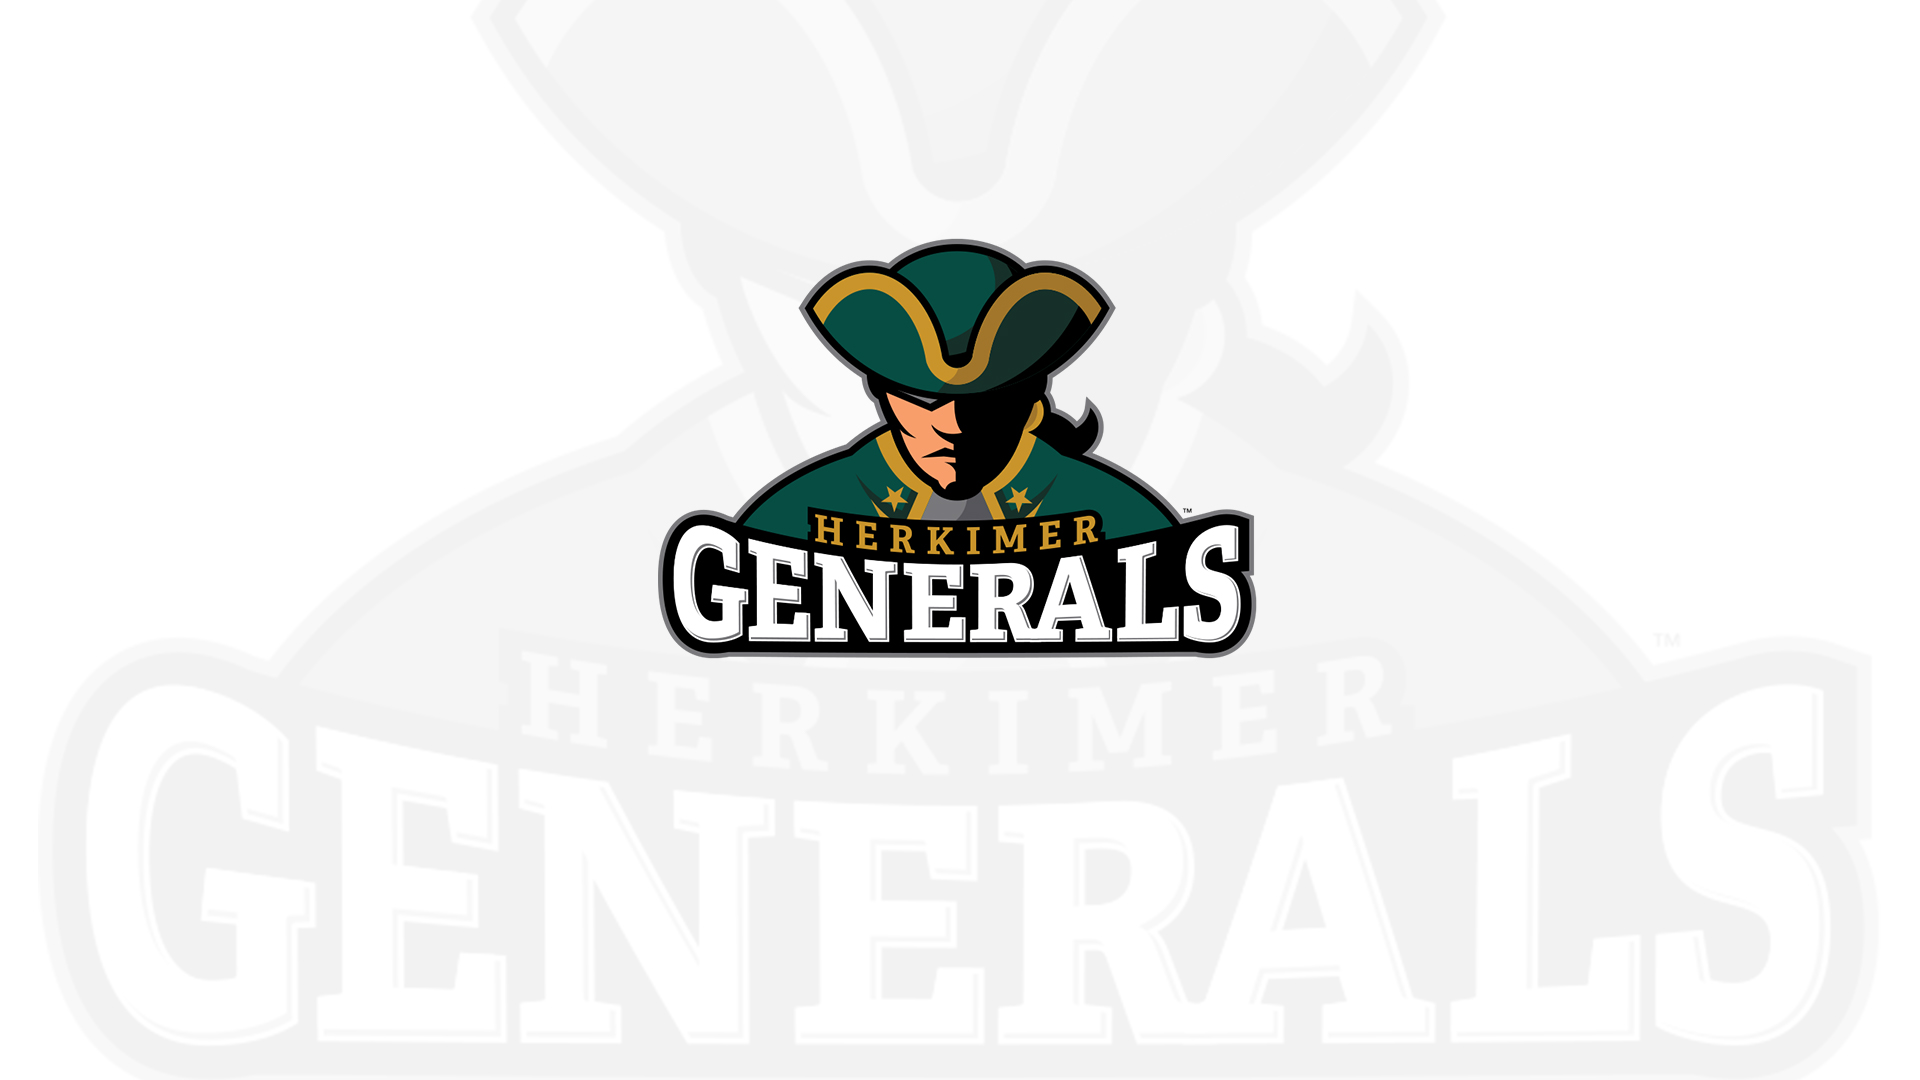 Several Generals Place at Region III Championship